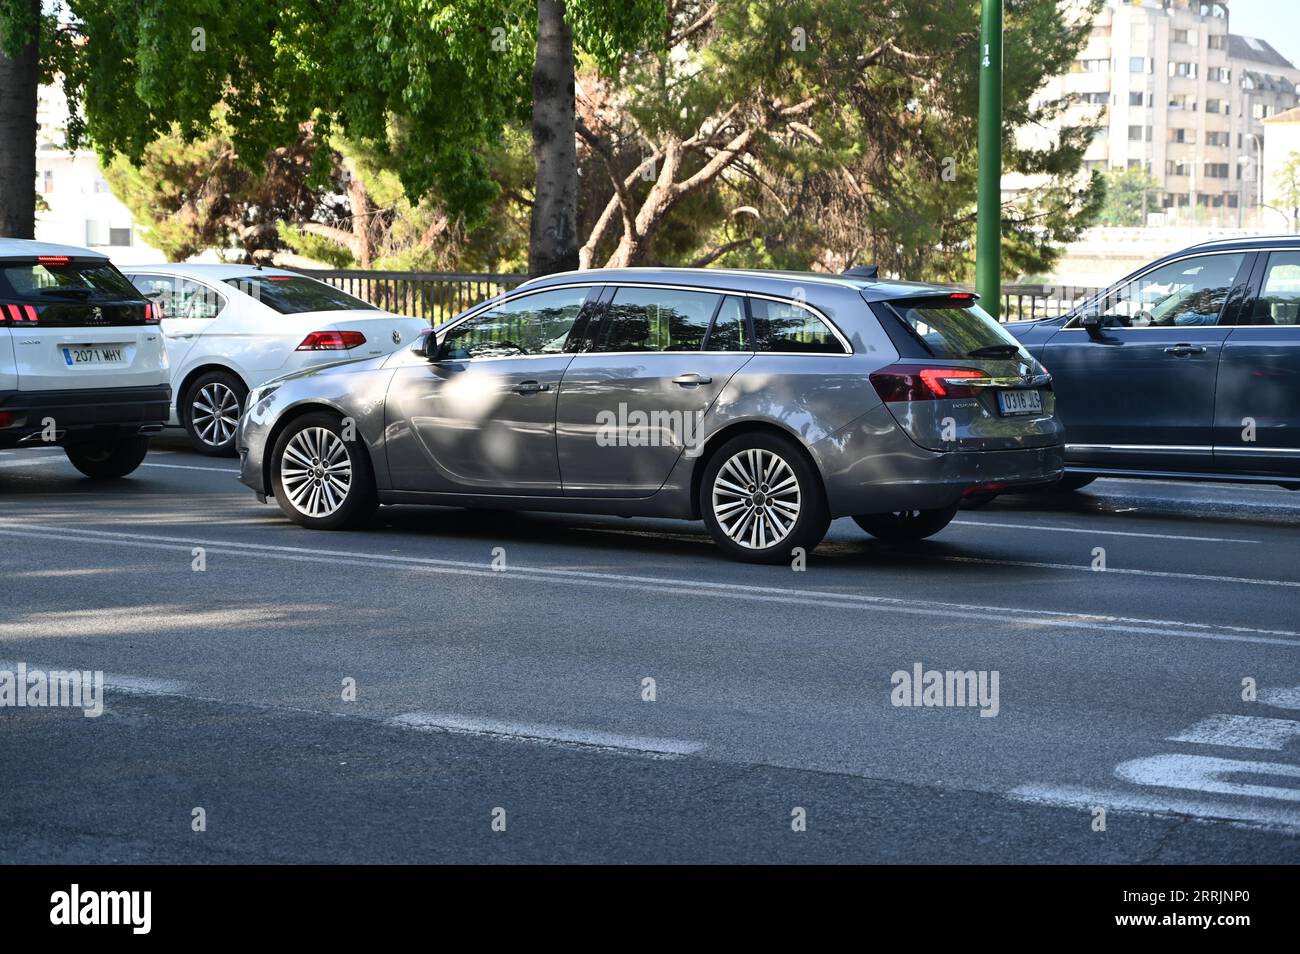 Opel Insignia on the streets of Saville. Stock Photo